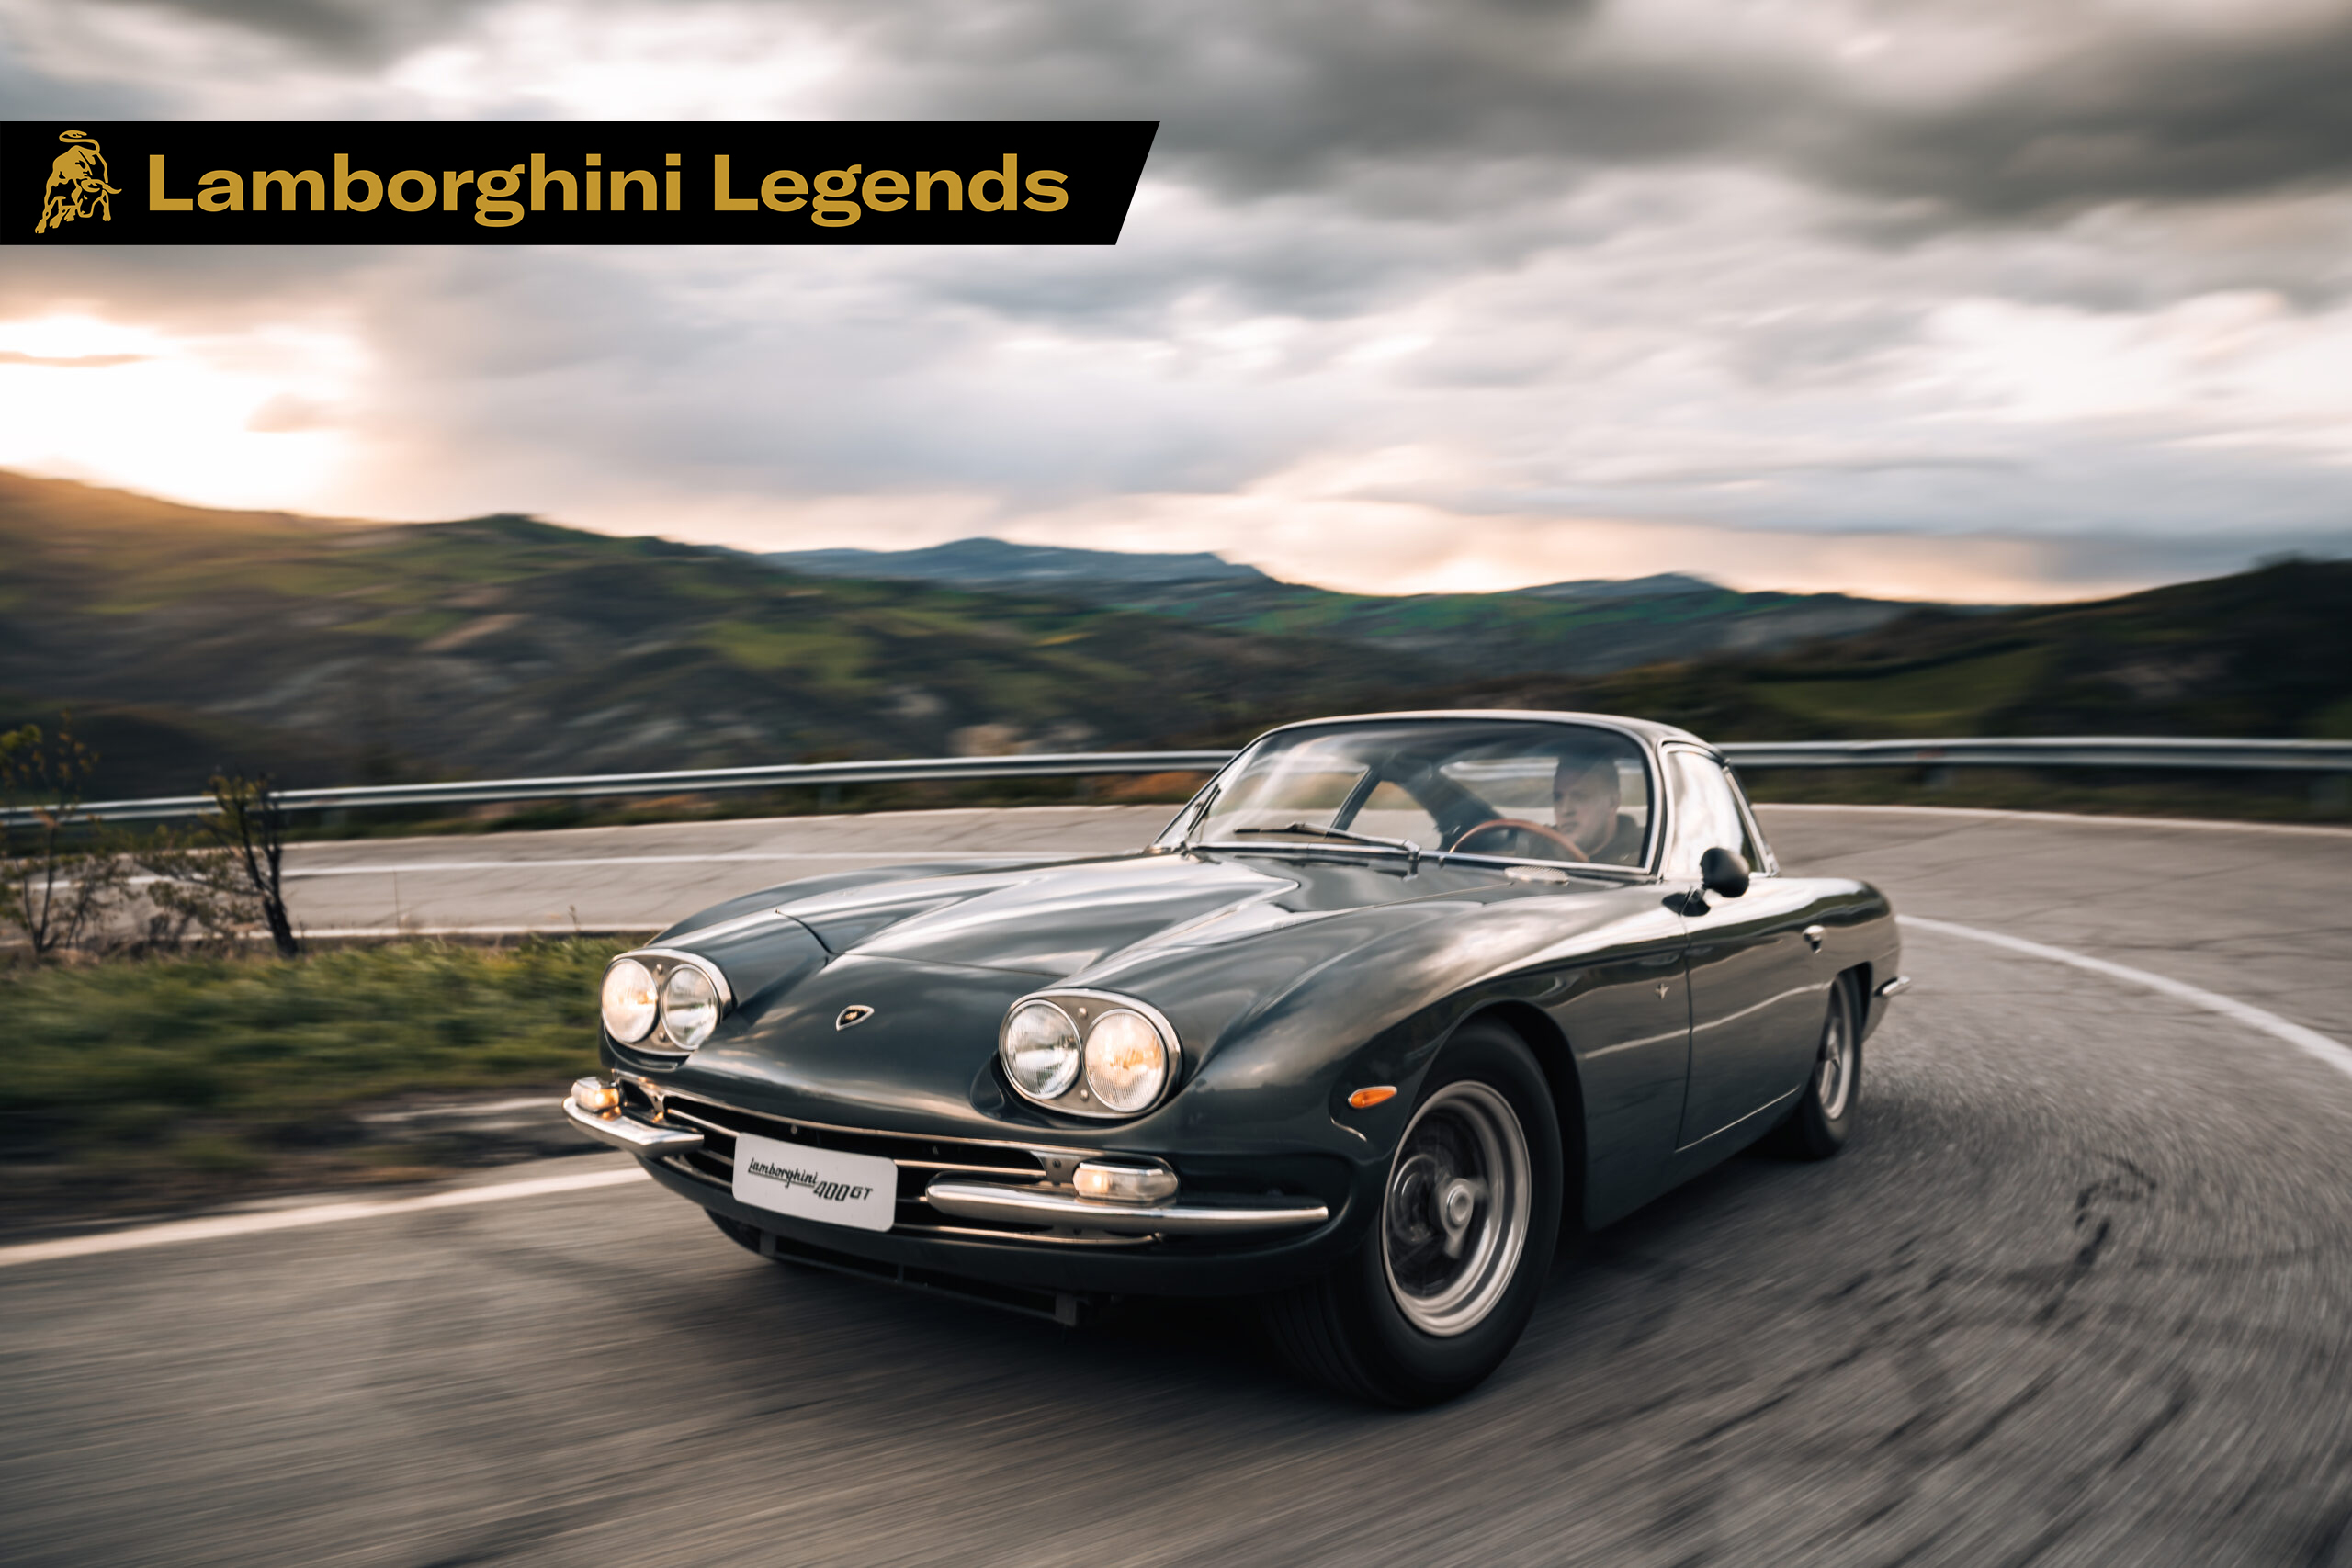 The 400 GT was a strong start for a young Lamborghini